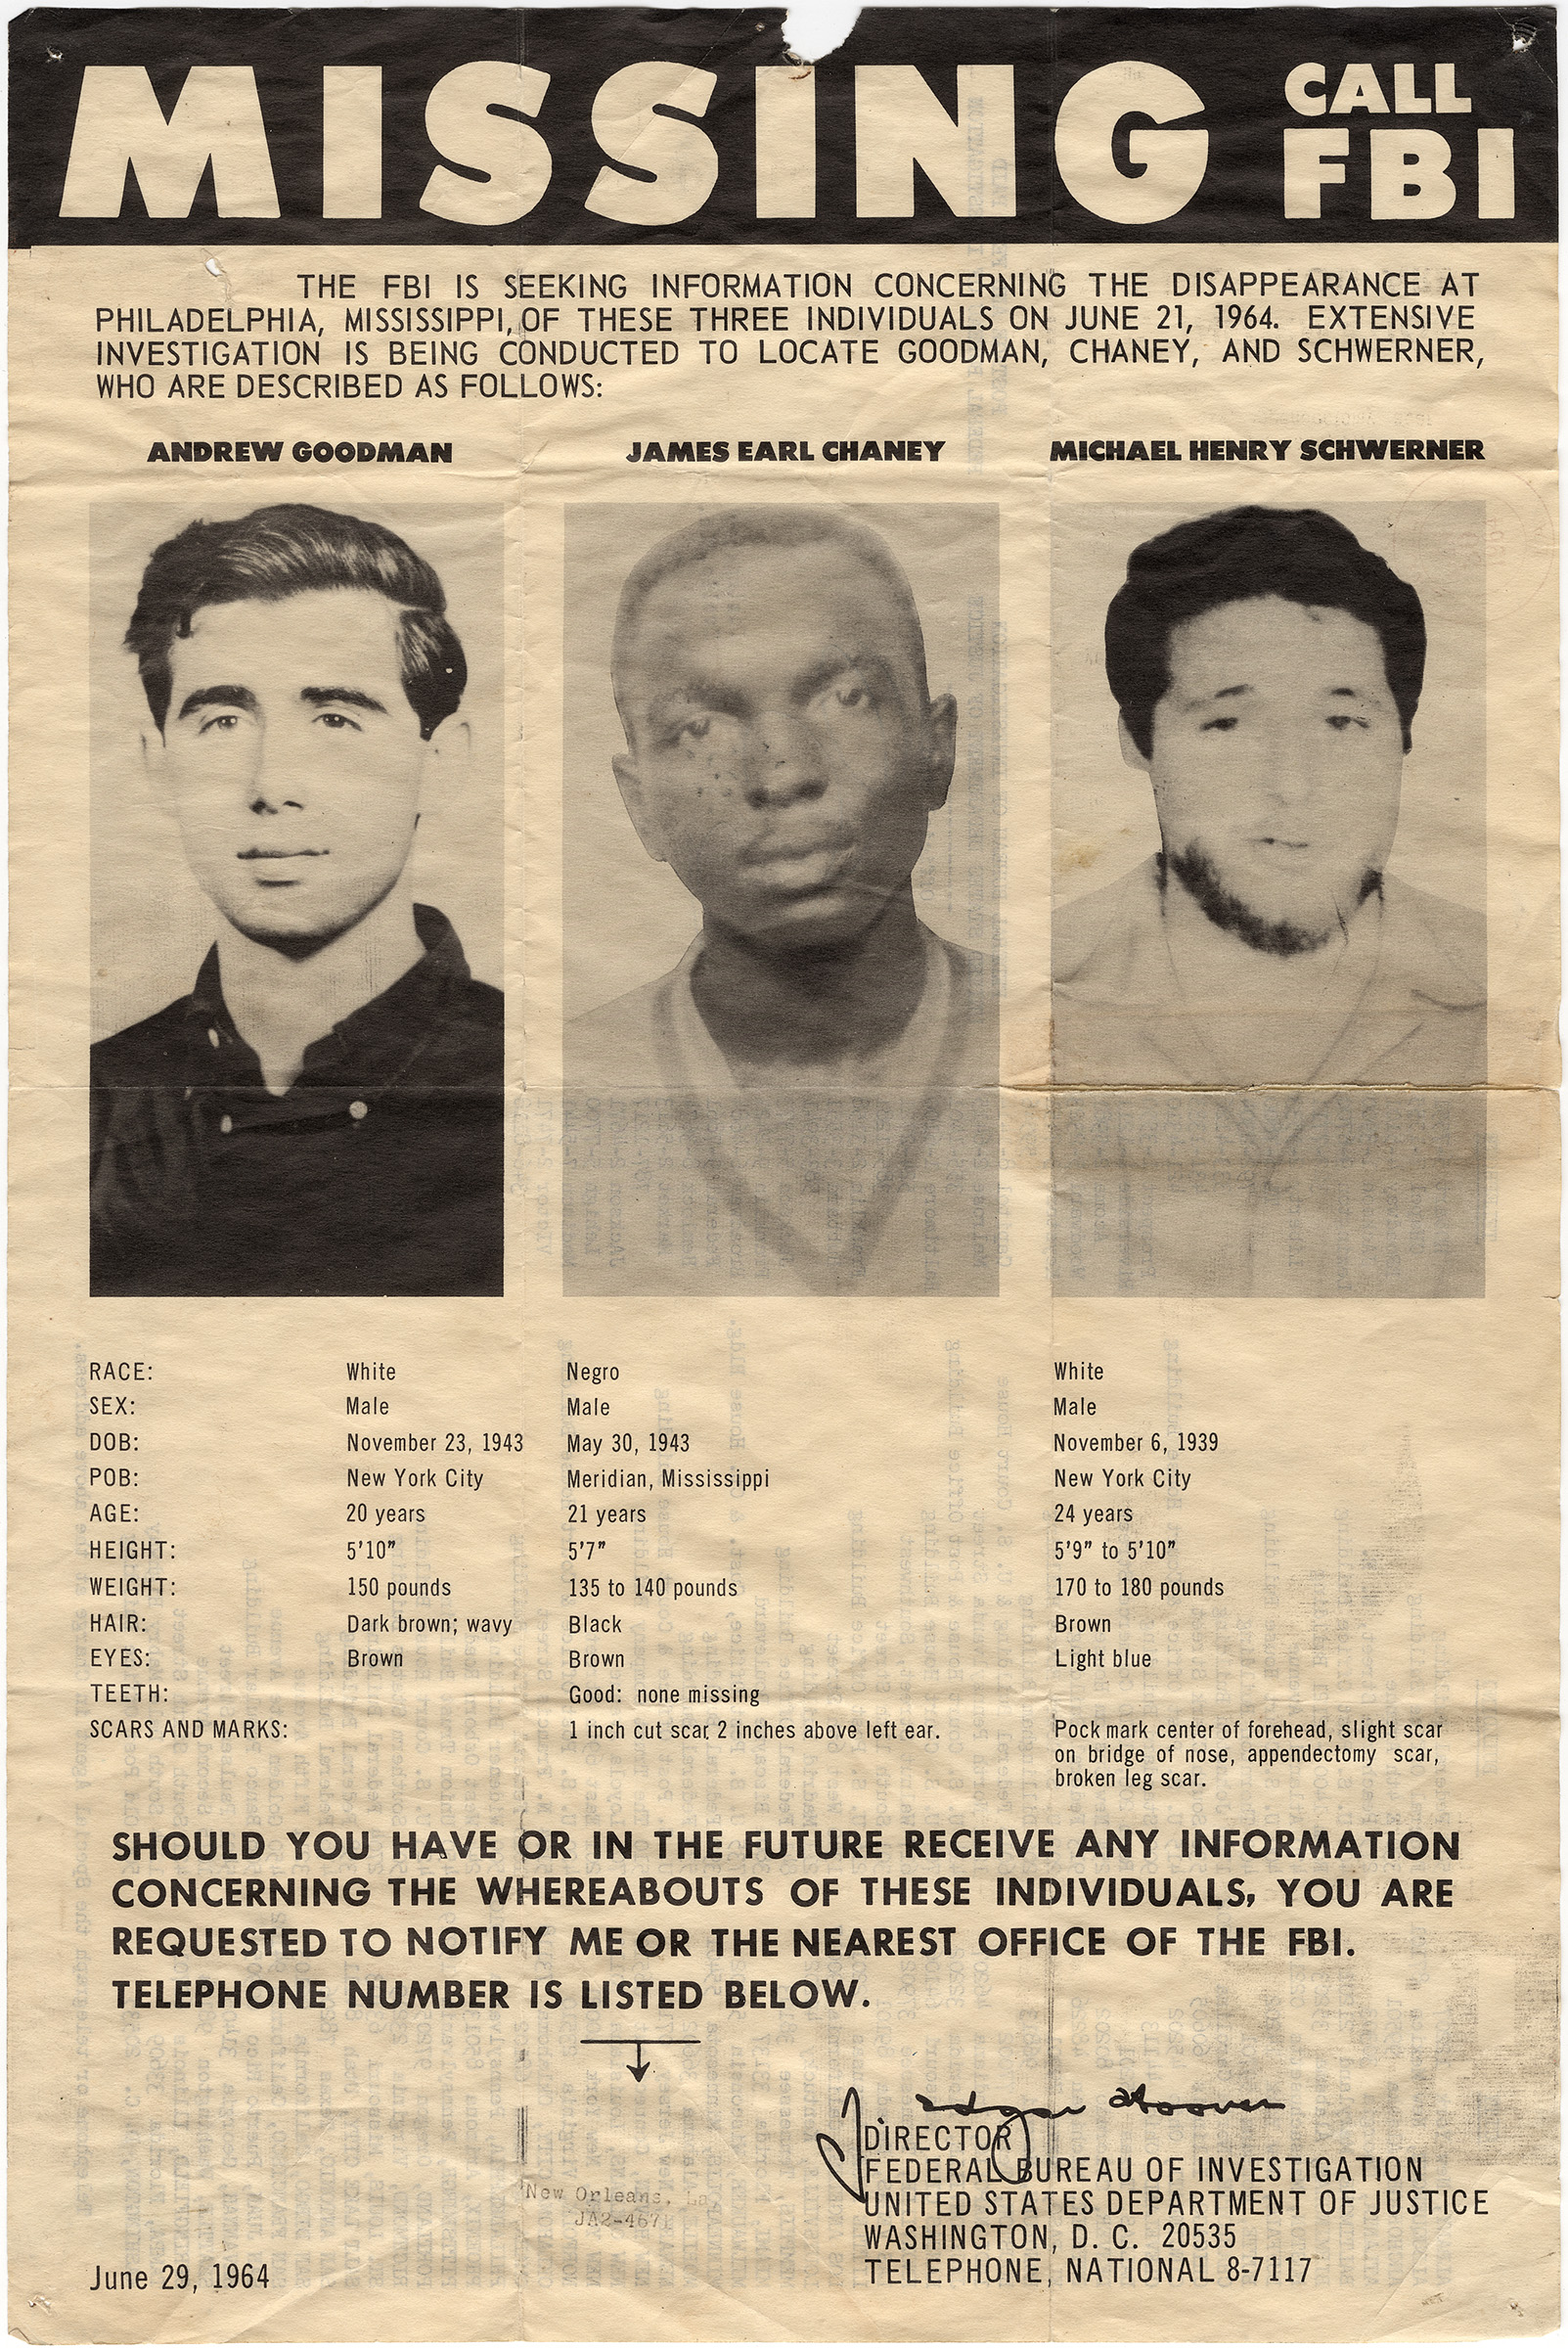 "Missing: Call FBI, 1964." Photograph by an unidentified photographer. International Center of Photography, New York City. Anonymous Gift, 2005 (10.2005). Photograph provided by the International Center of Photography.